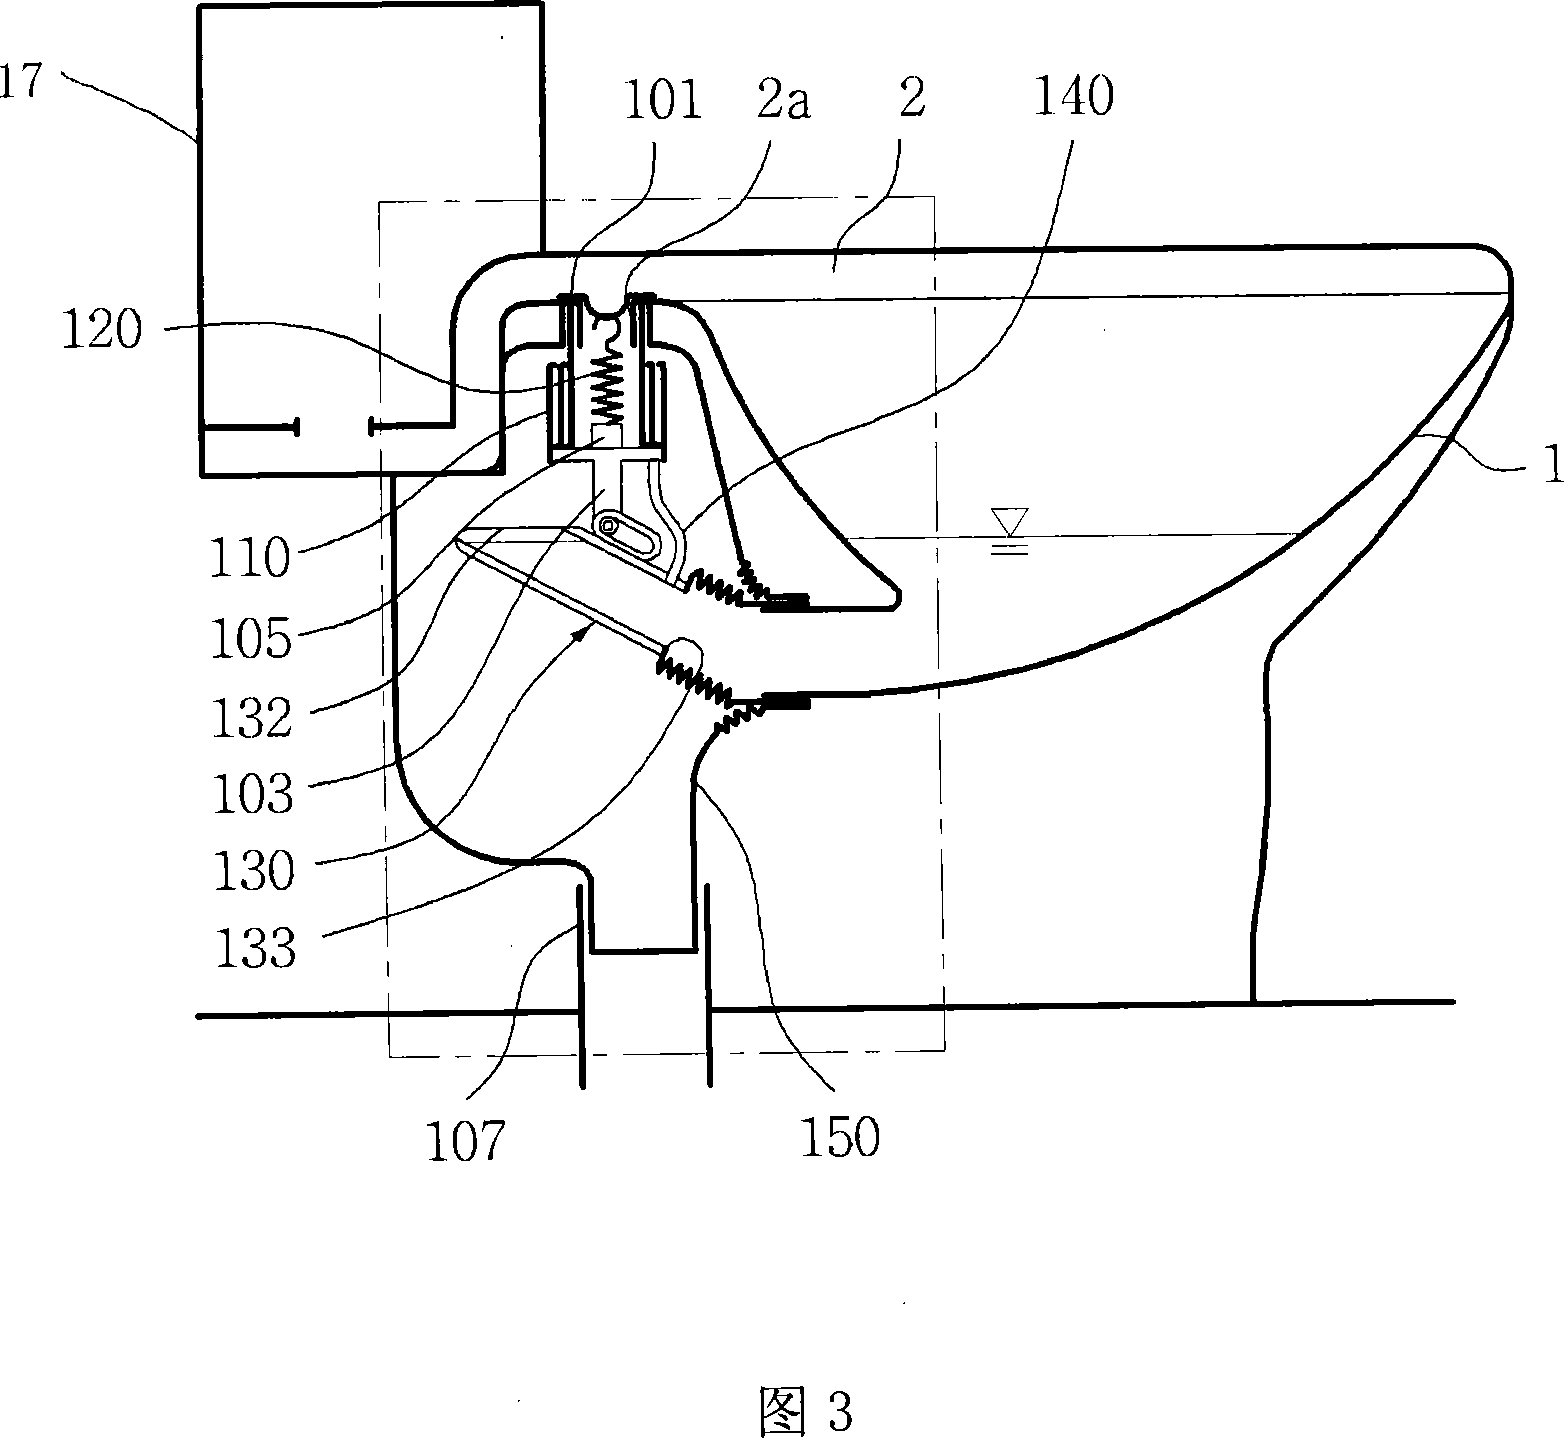 Excretion exhaust apparatus of water closet